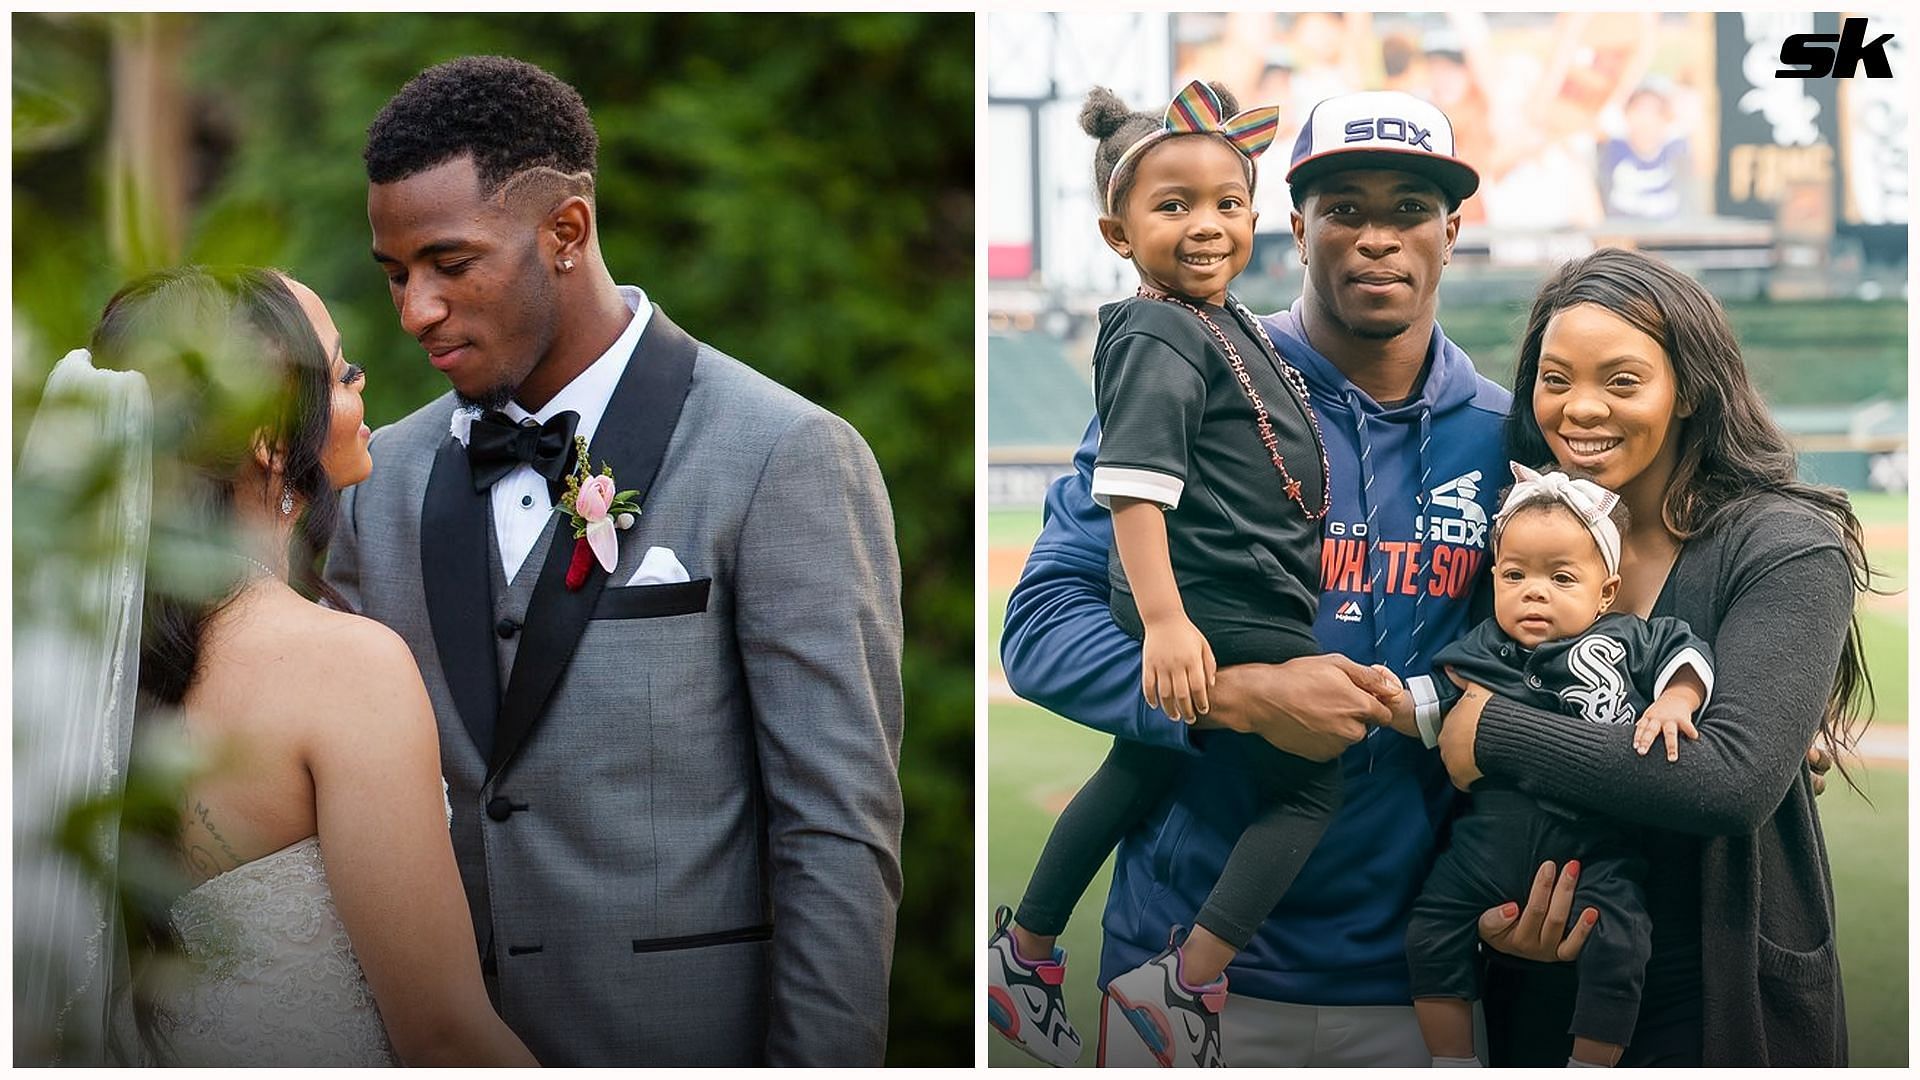 In Photos: Marlins shortstop Tim Anderson embraces fatherhood again with wife Bria as they welcome third child